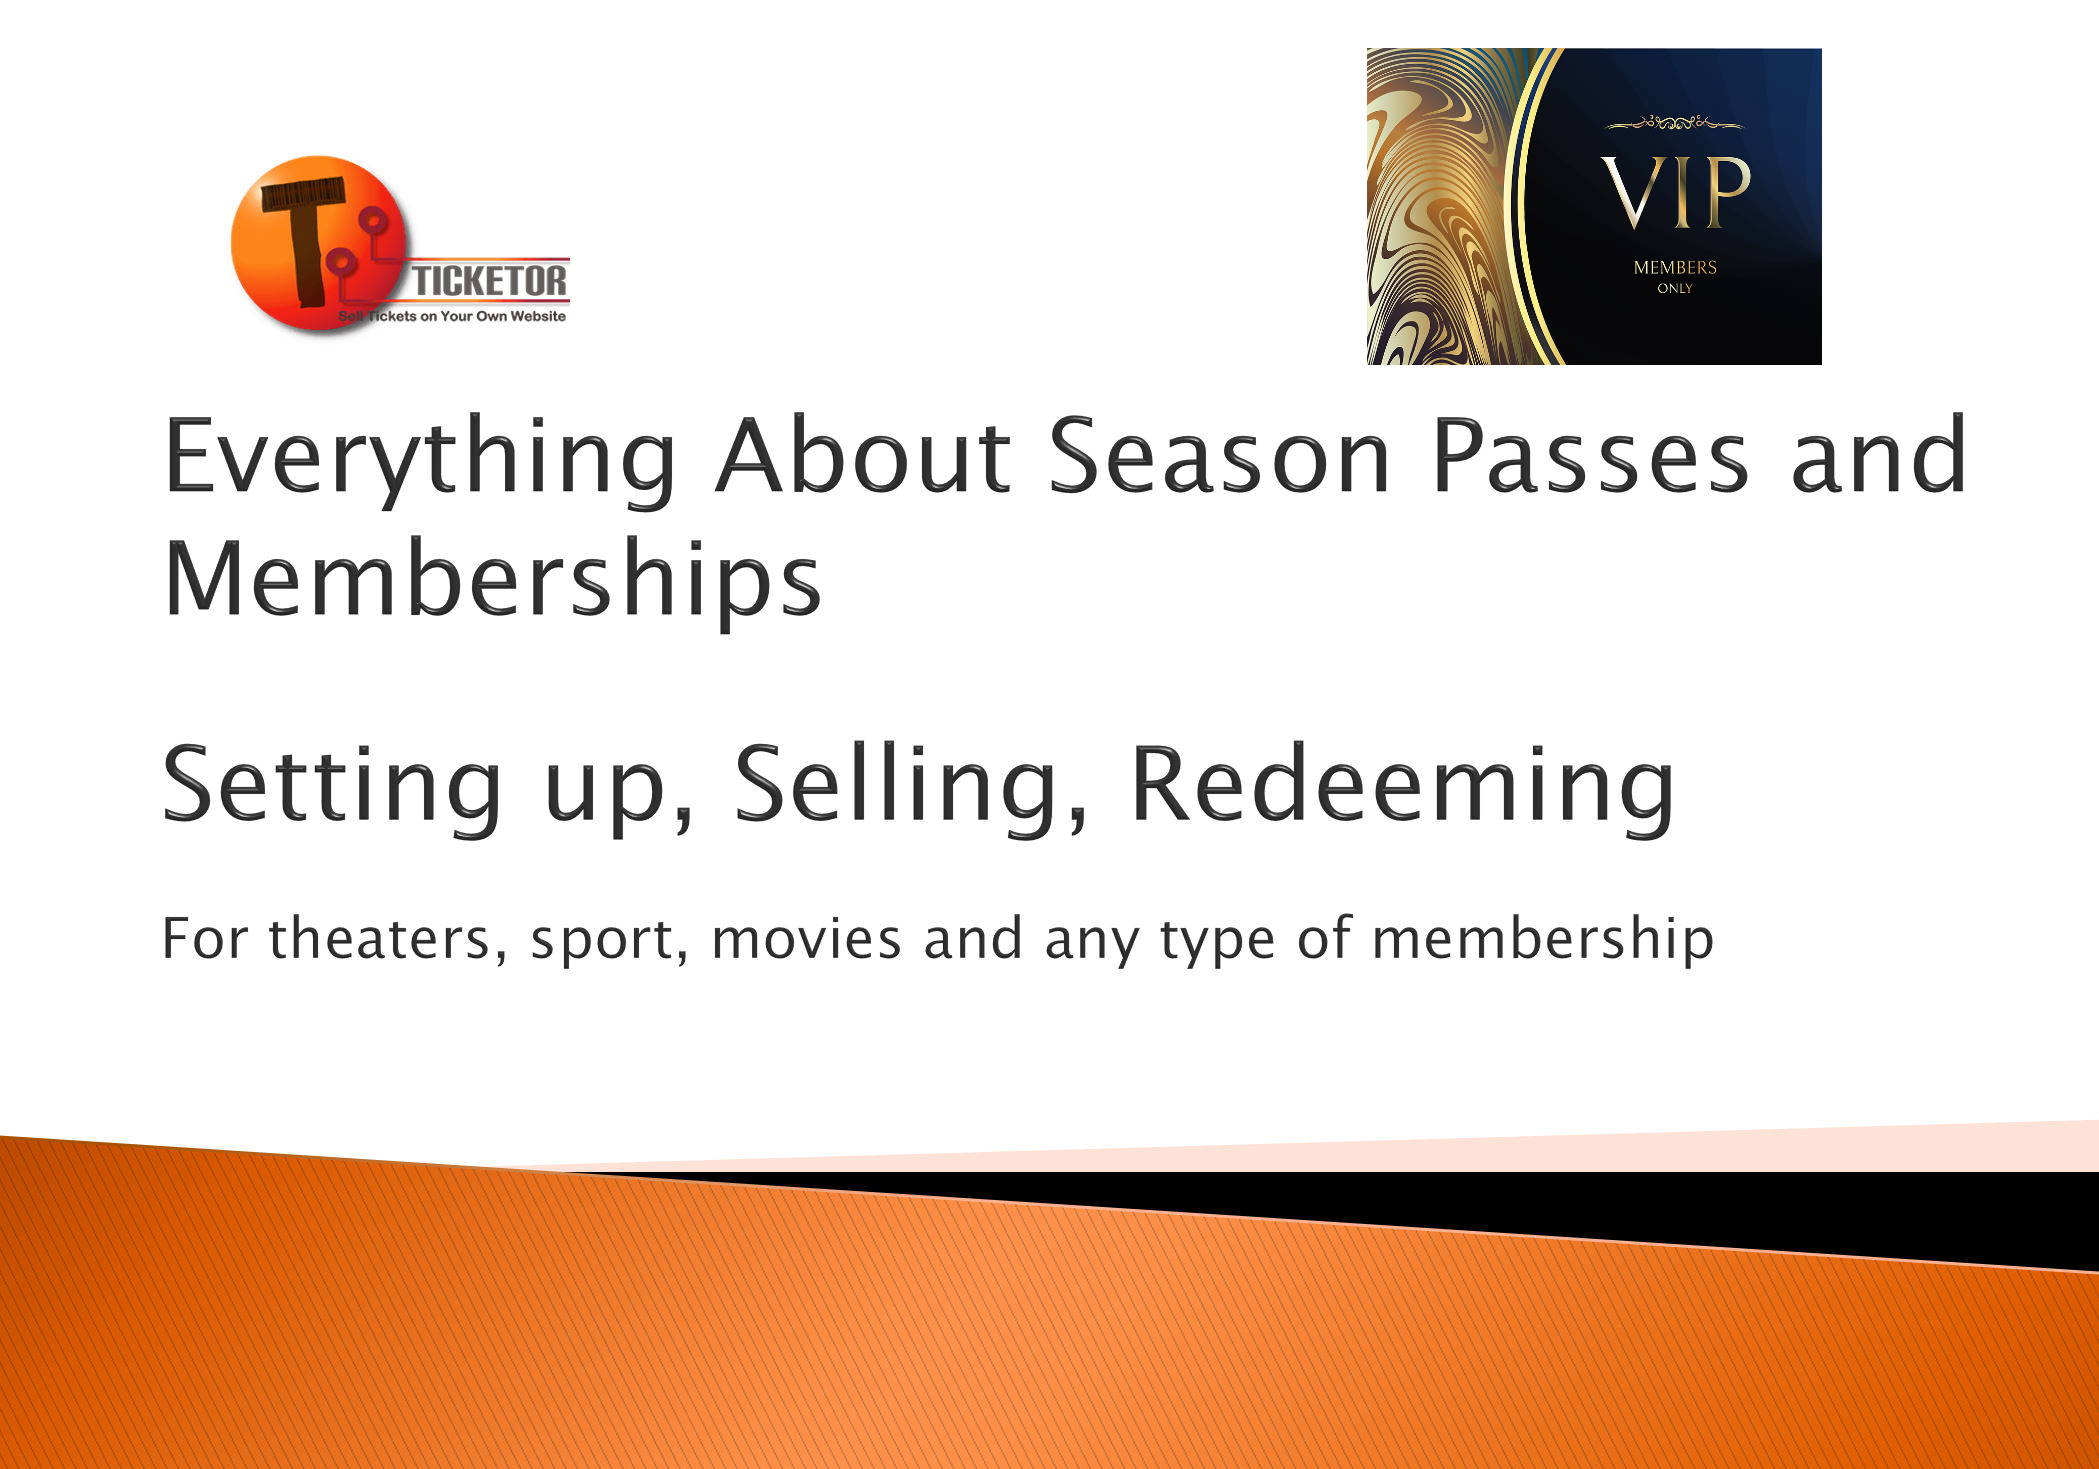 Everything About Season Passes and Memberships for Theaters and Sports: Setting up, Selling, Redeeming